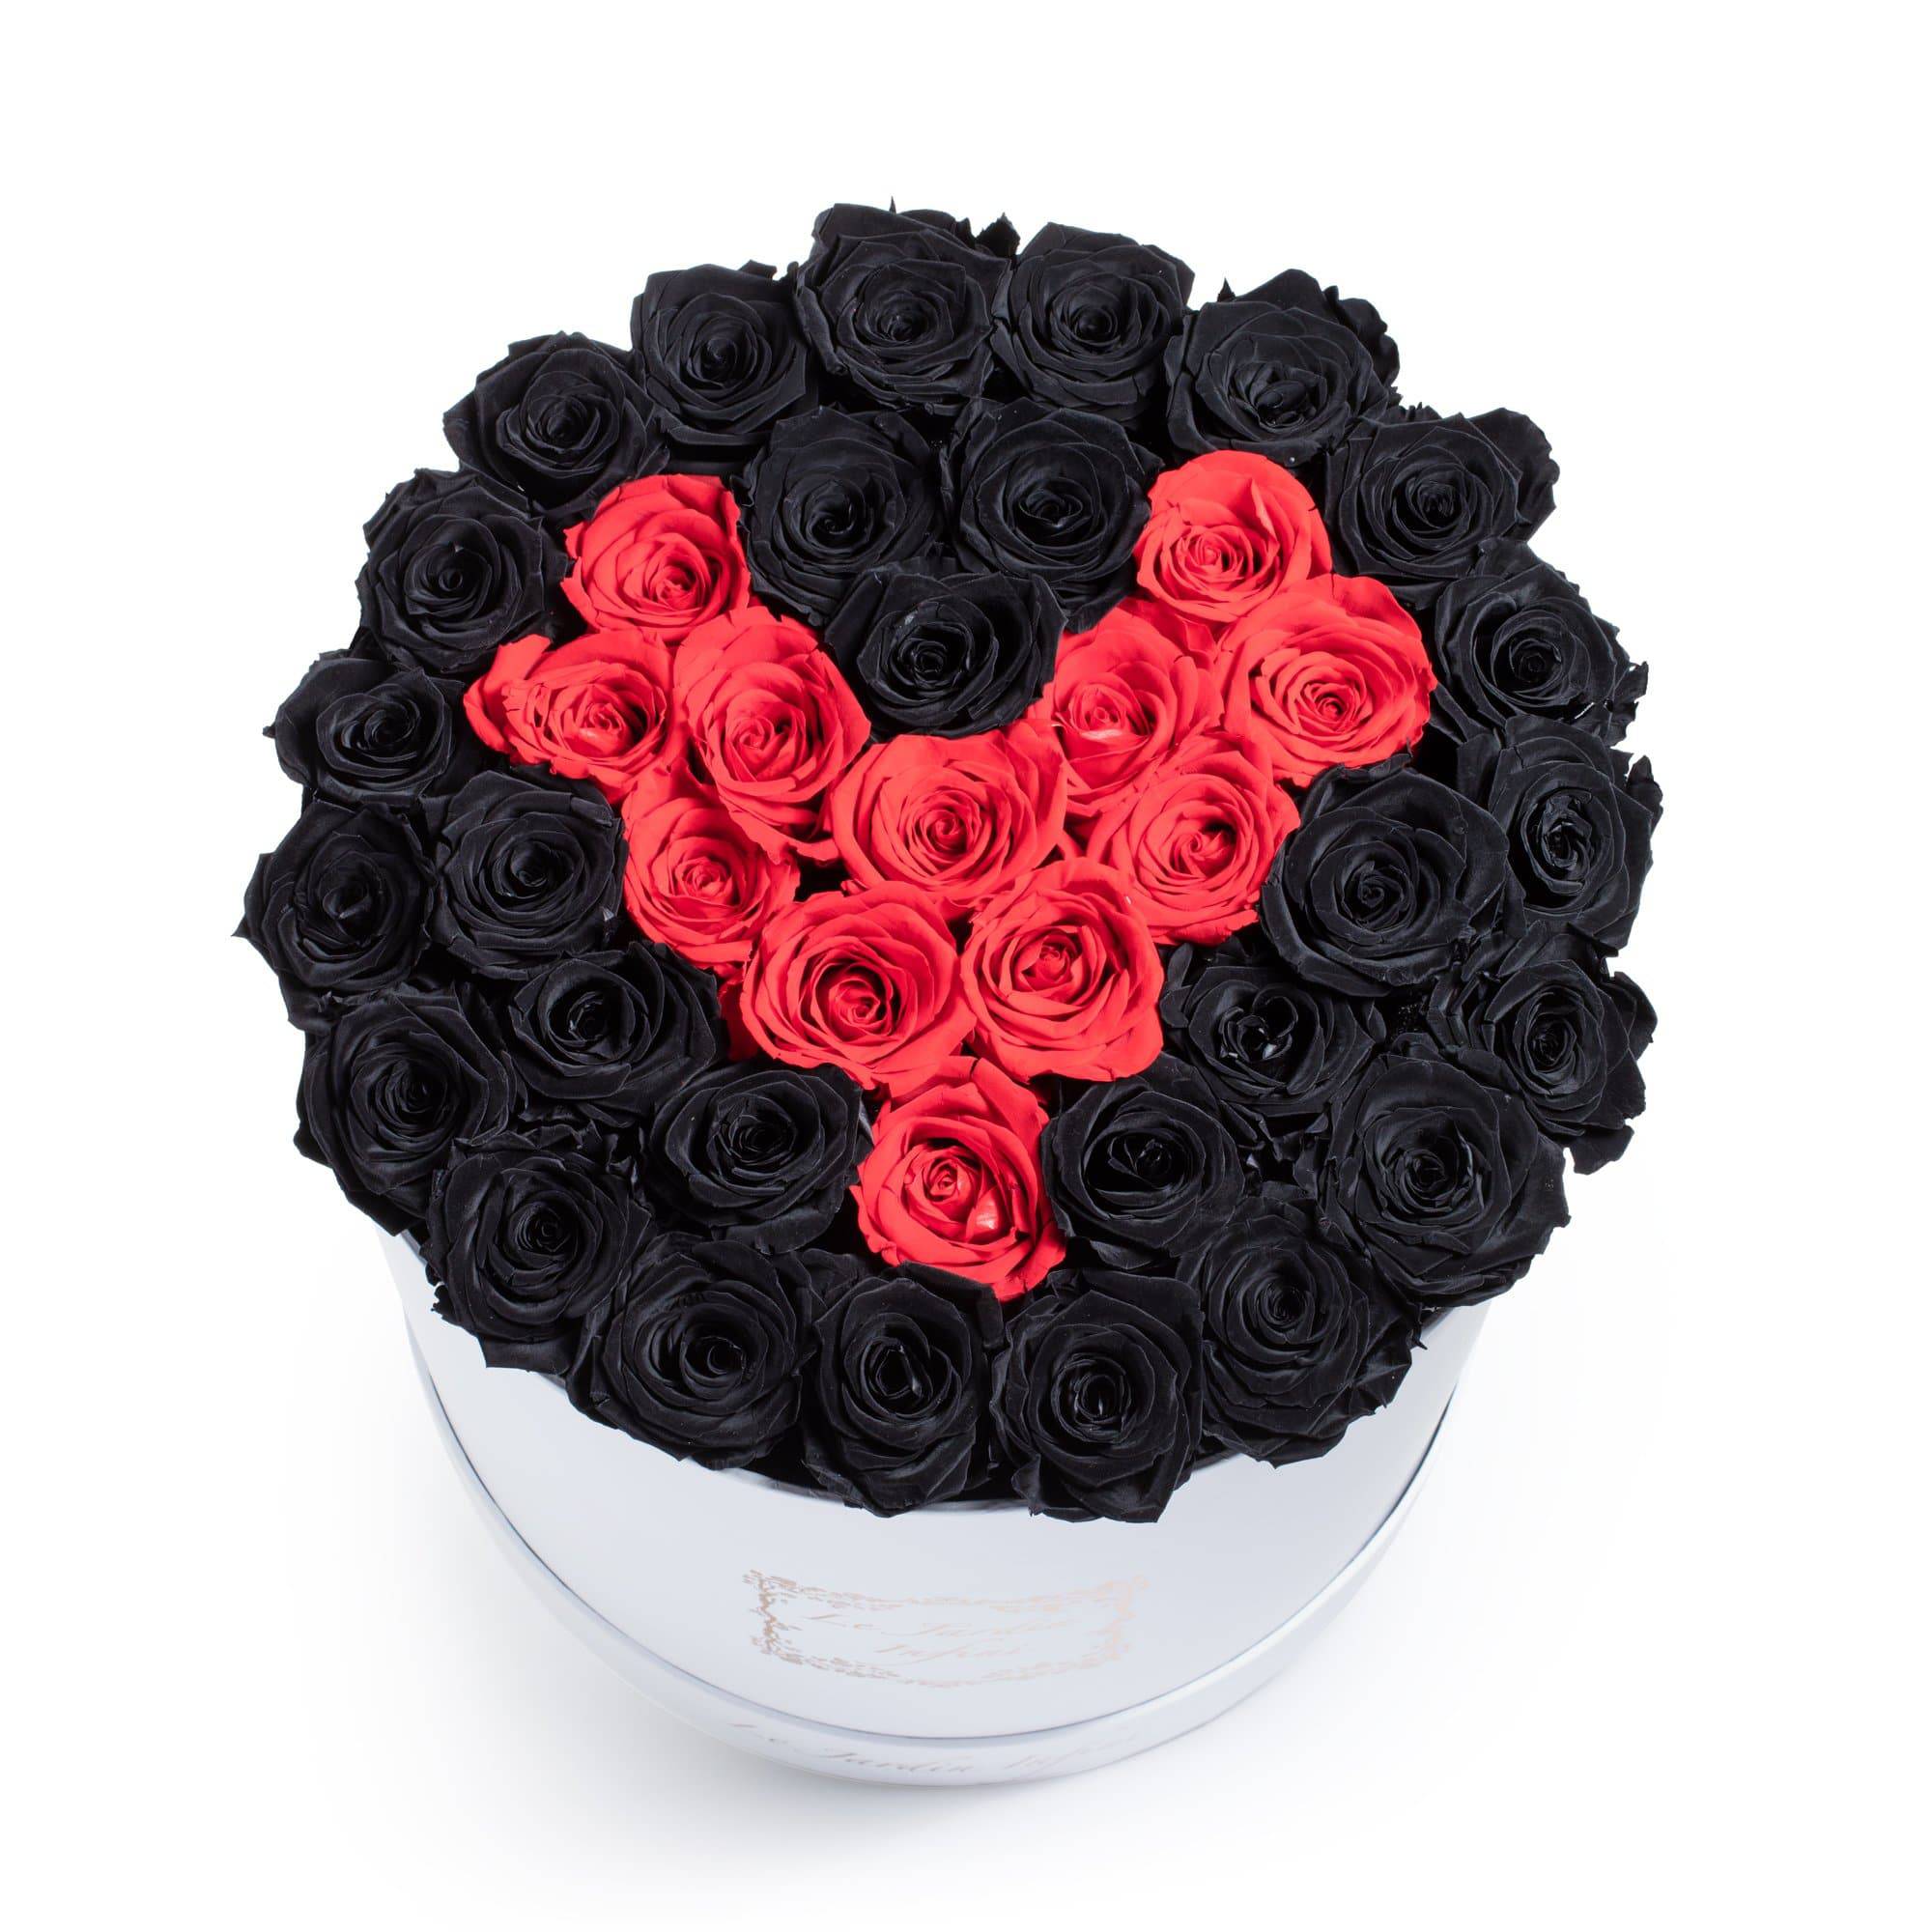 Black & Red Heart Preserved Roses - Large Round White Box - Le Jardin Infini Roses in a Box